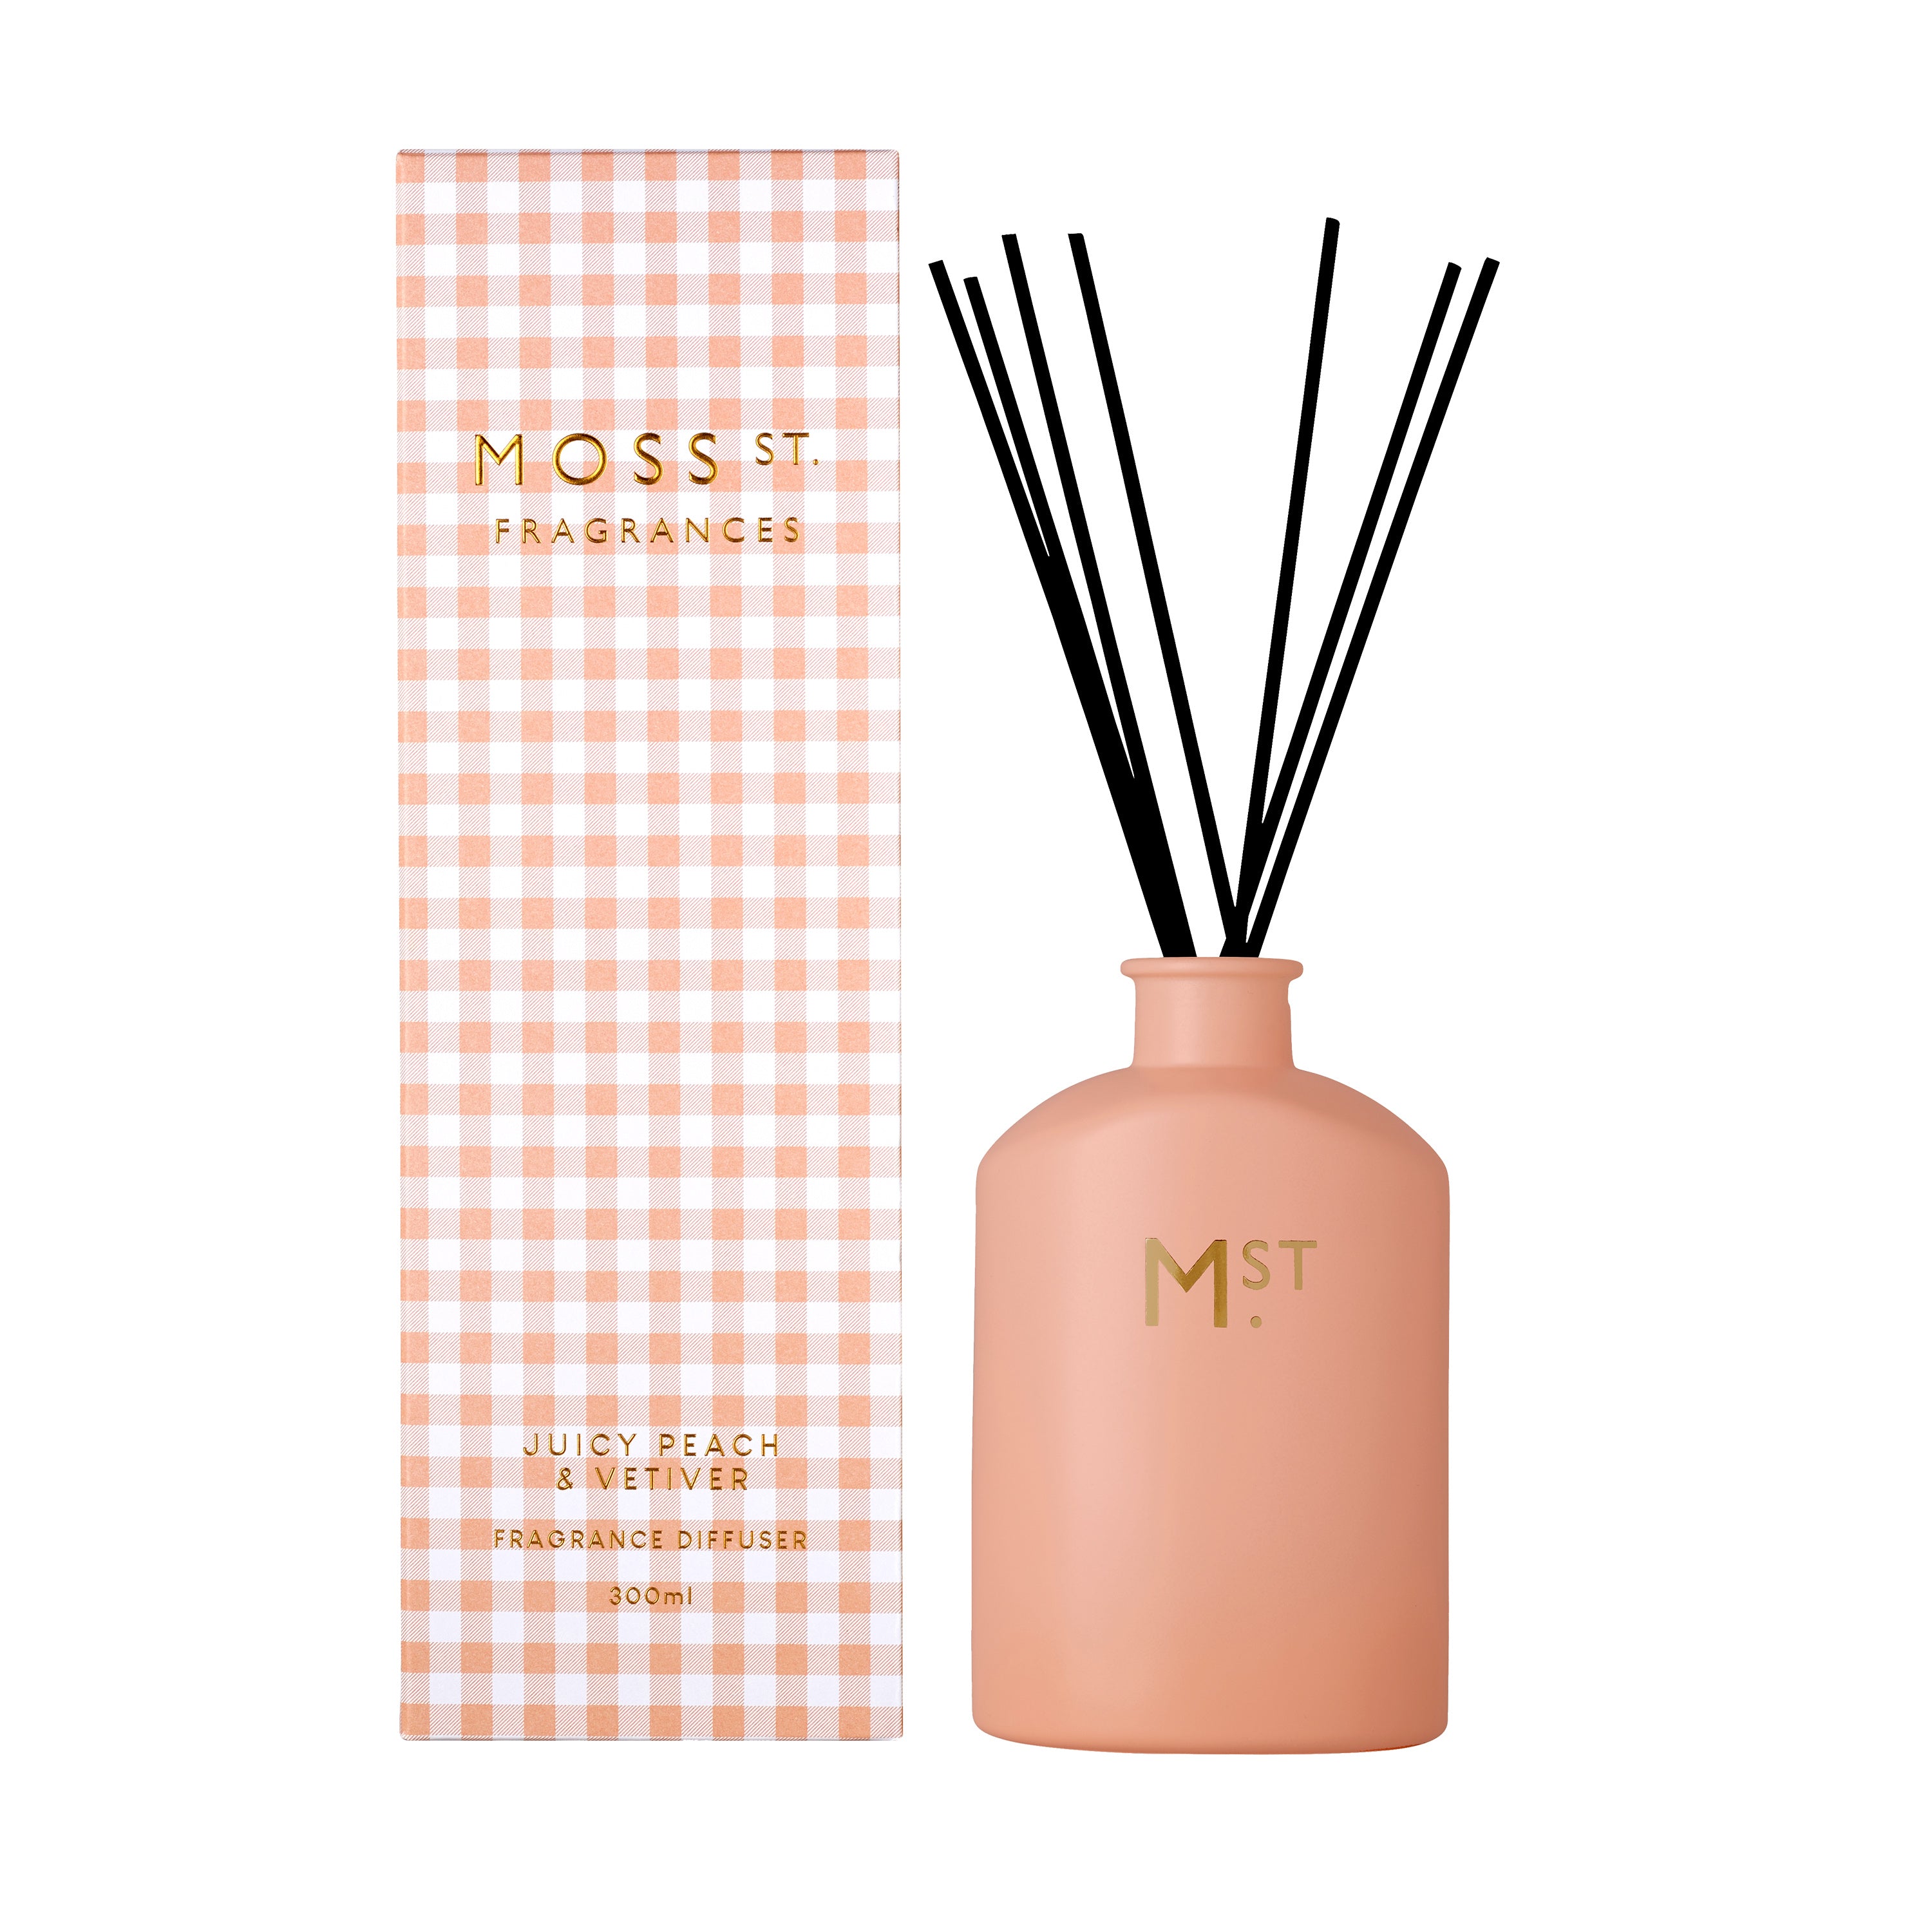 Moss St Juicy Peach & Vetiver Large Diffuser 300ml (Limited Edition)